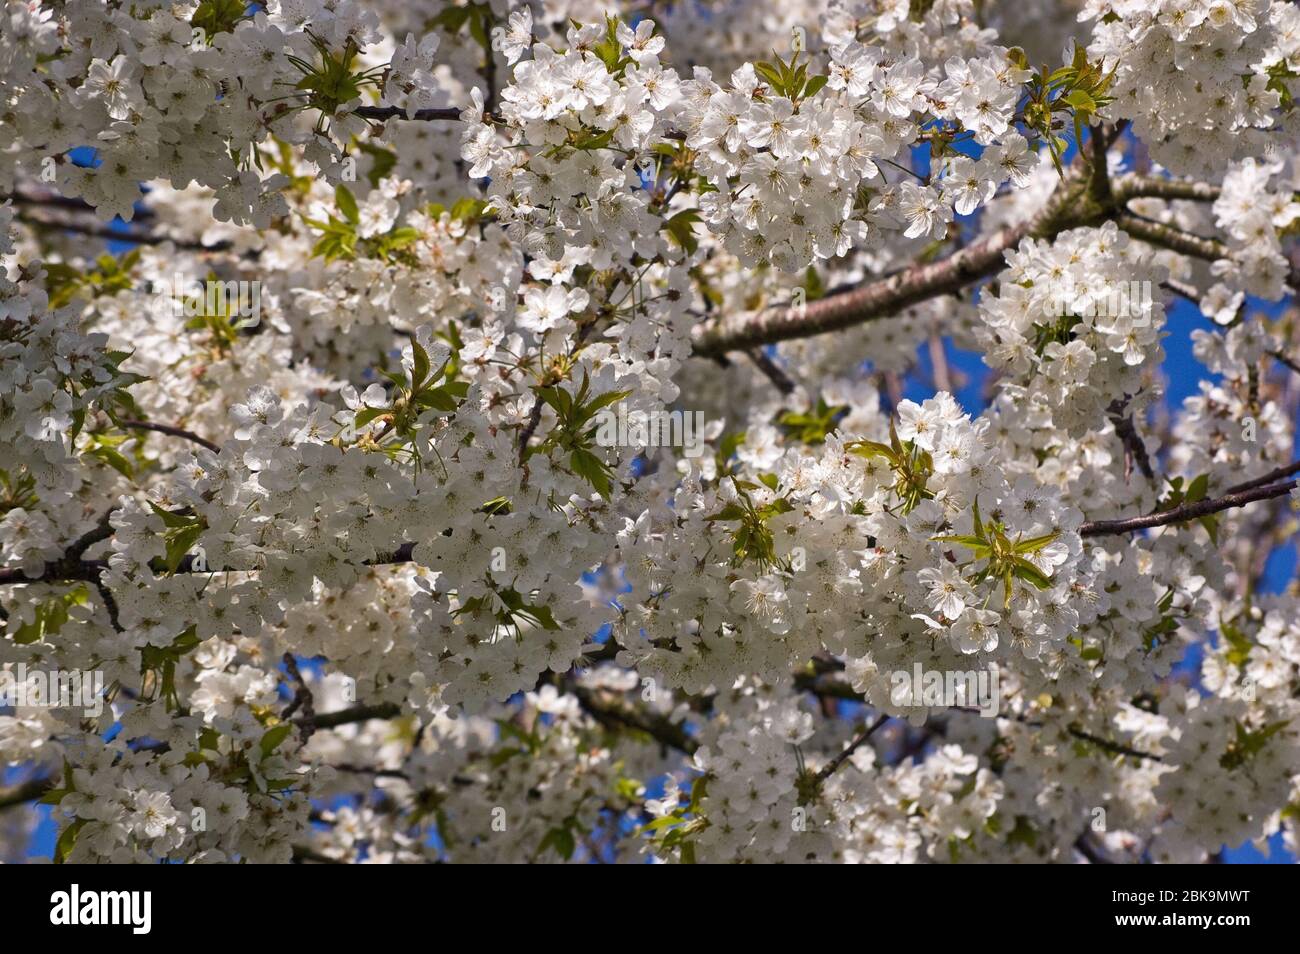 Sunshine on the branches of a flowering cherry tree in full bloom at Springtime. Stock Photo